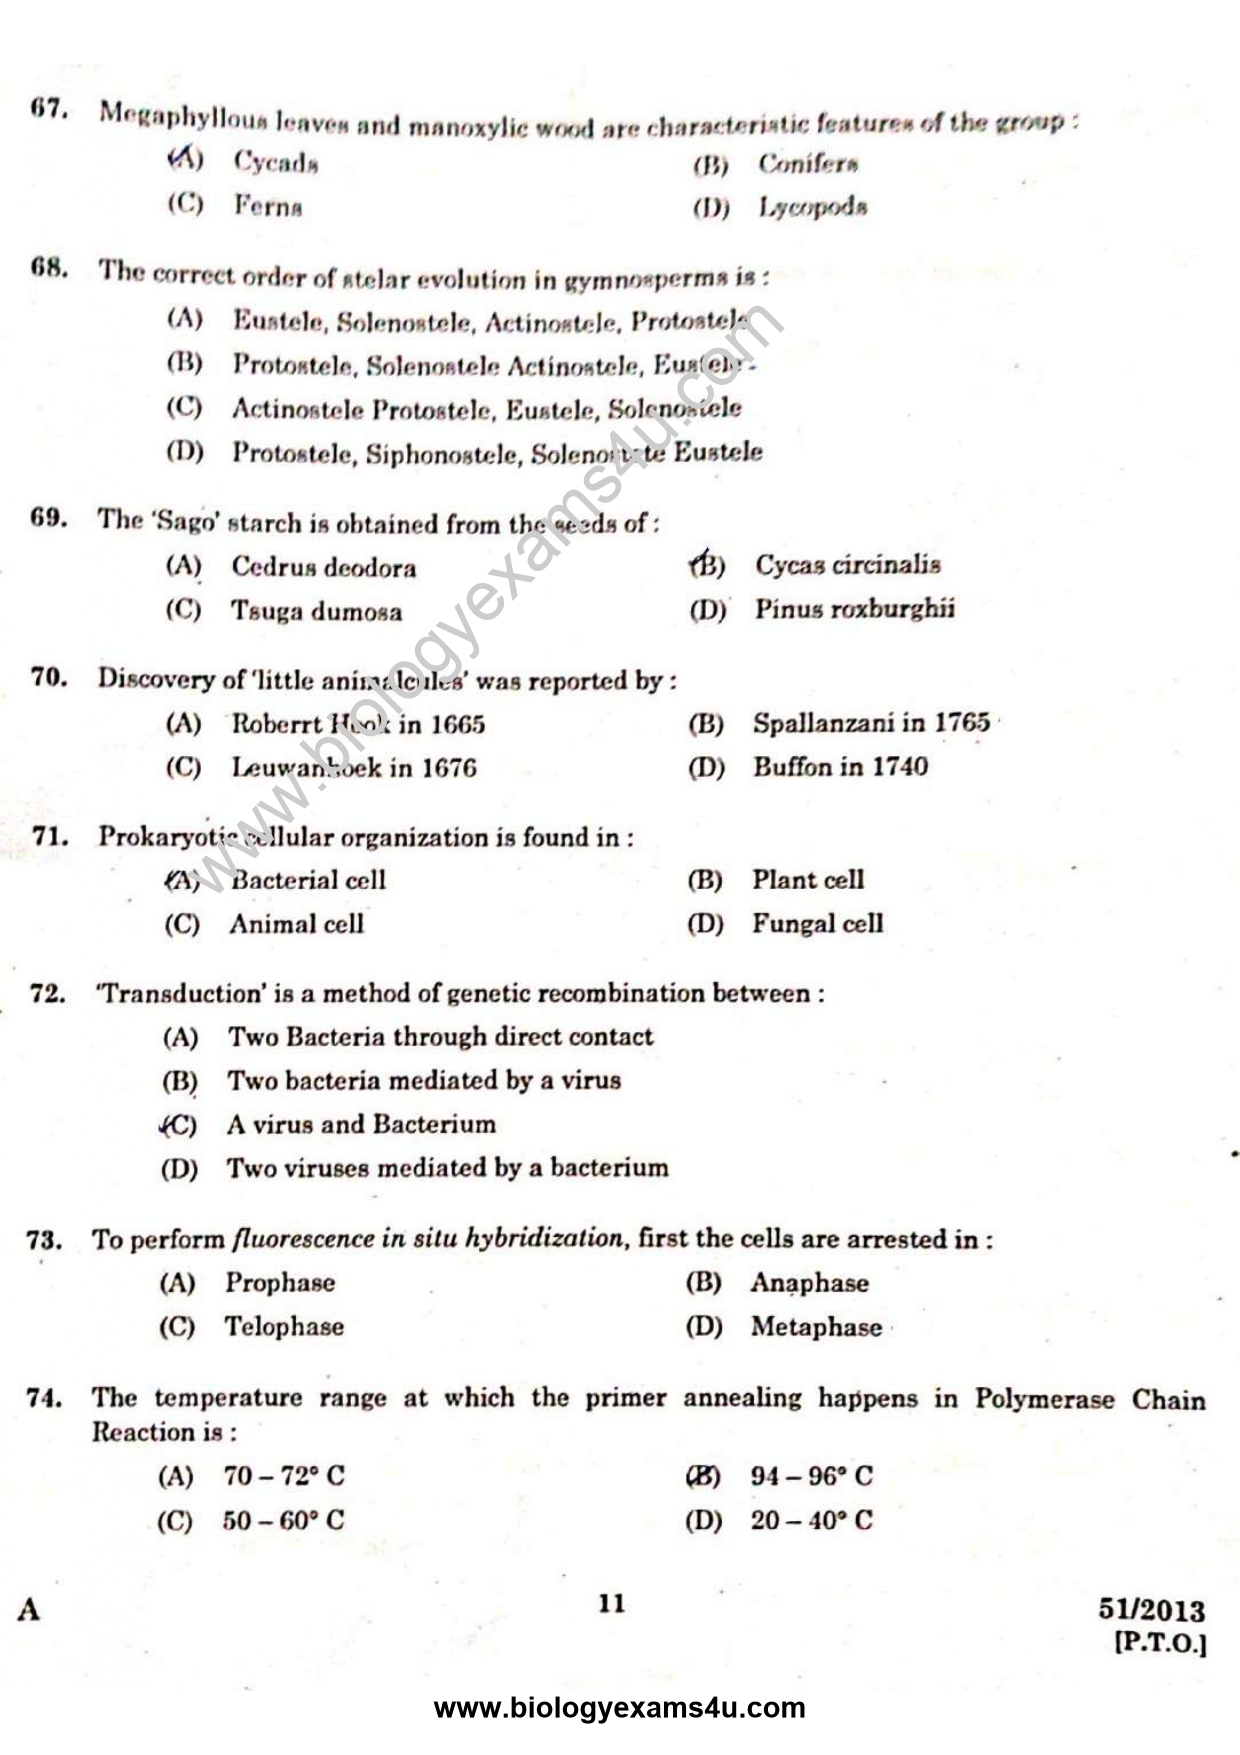 Scientific Officer Biology - Question Paper with Answer Key 51/2013